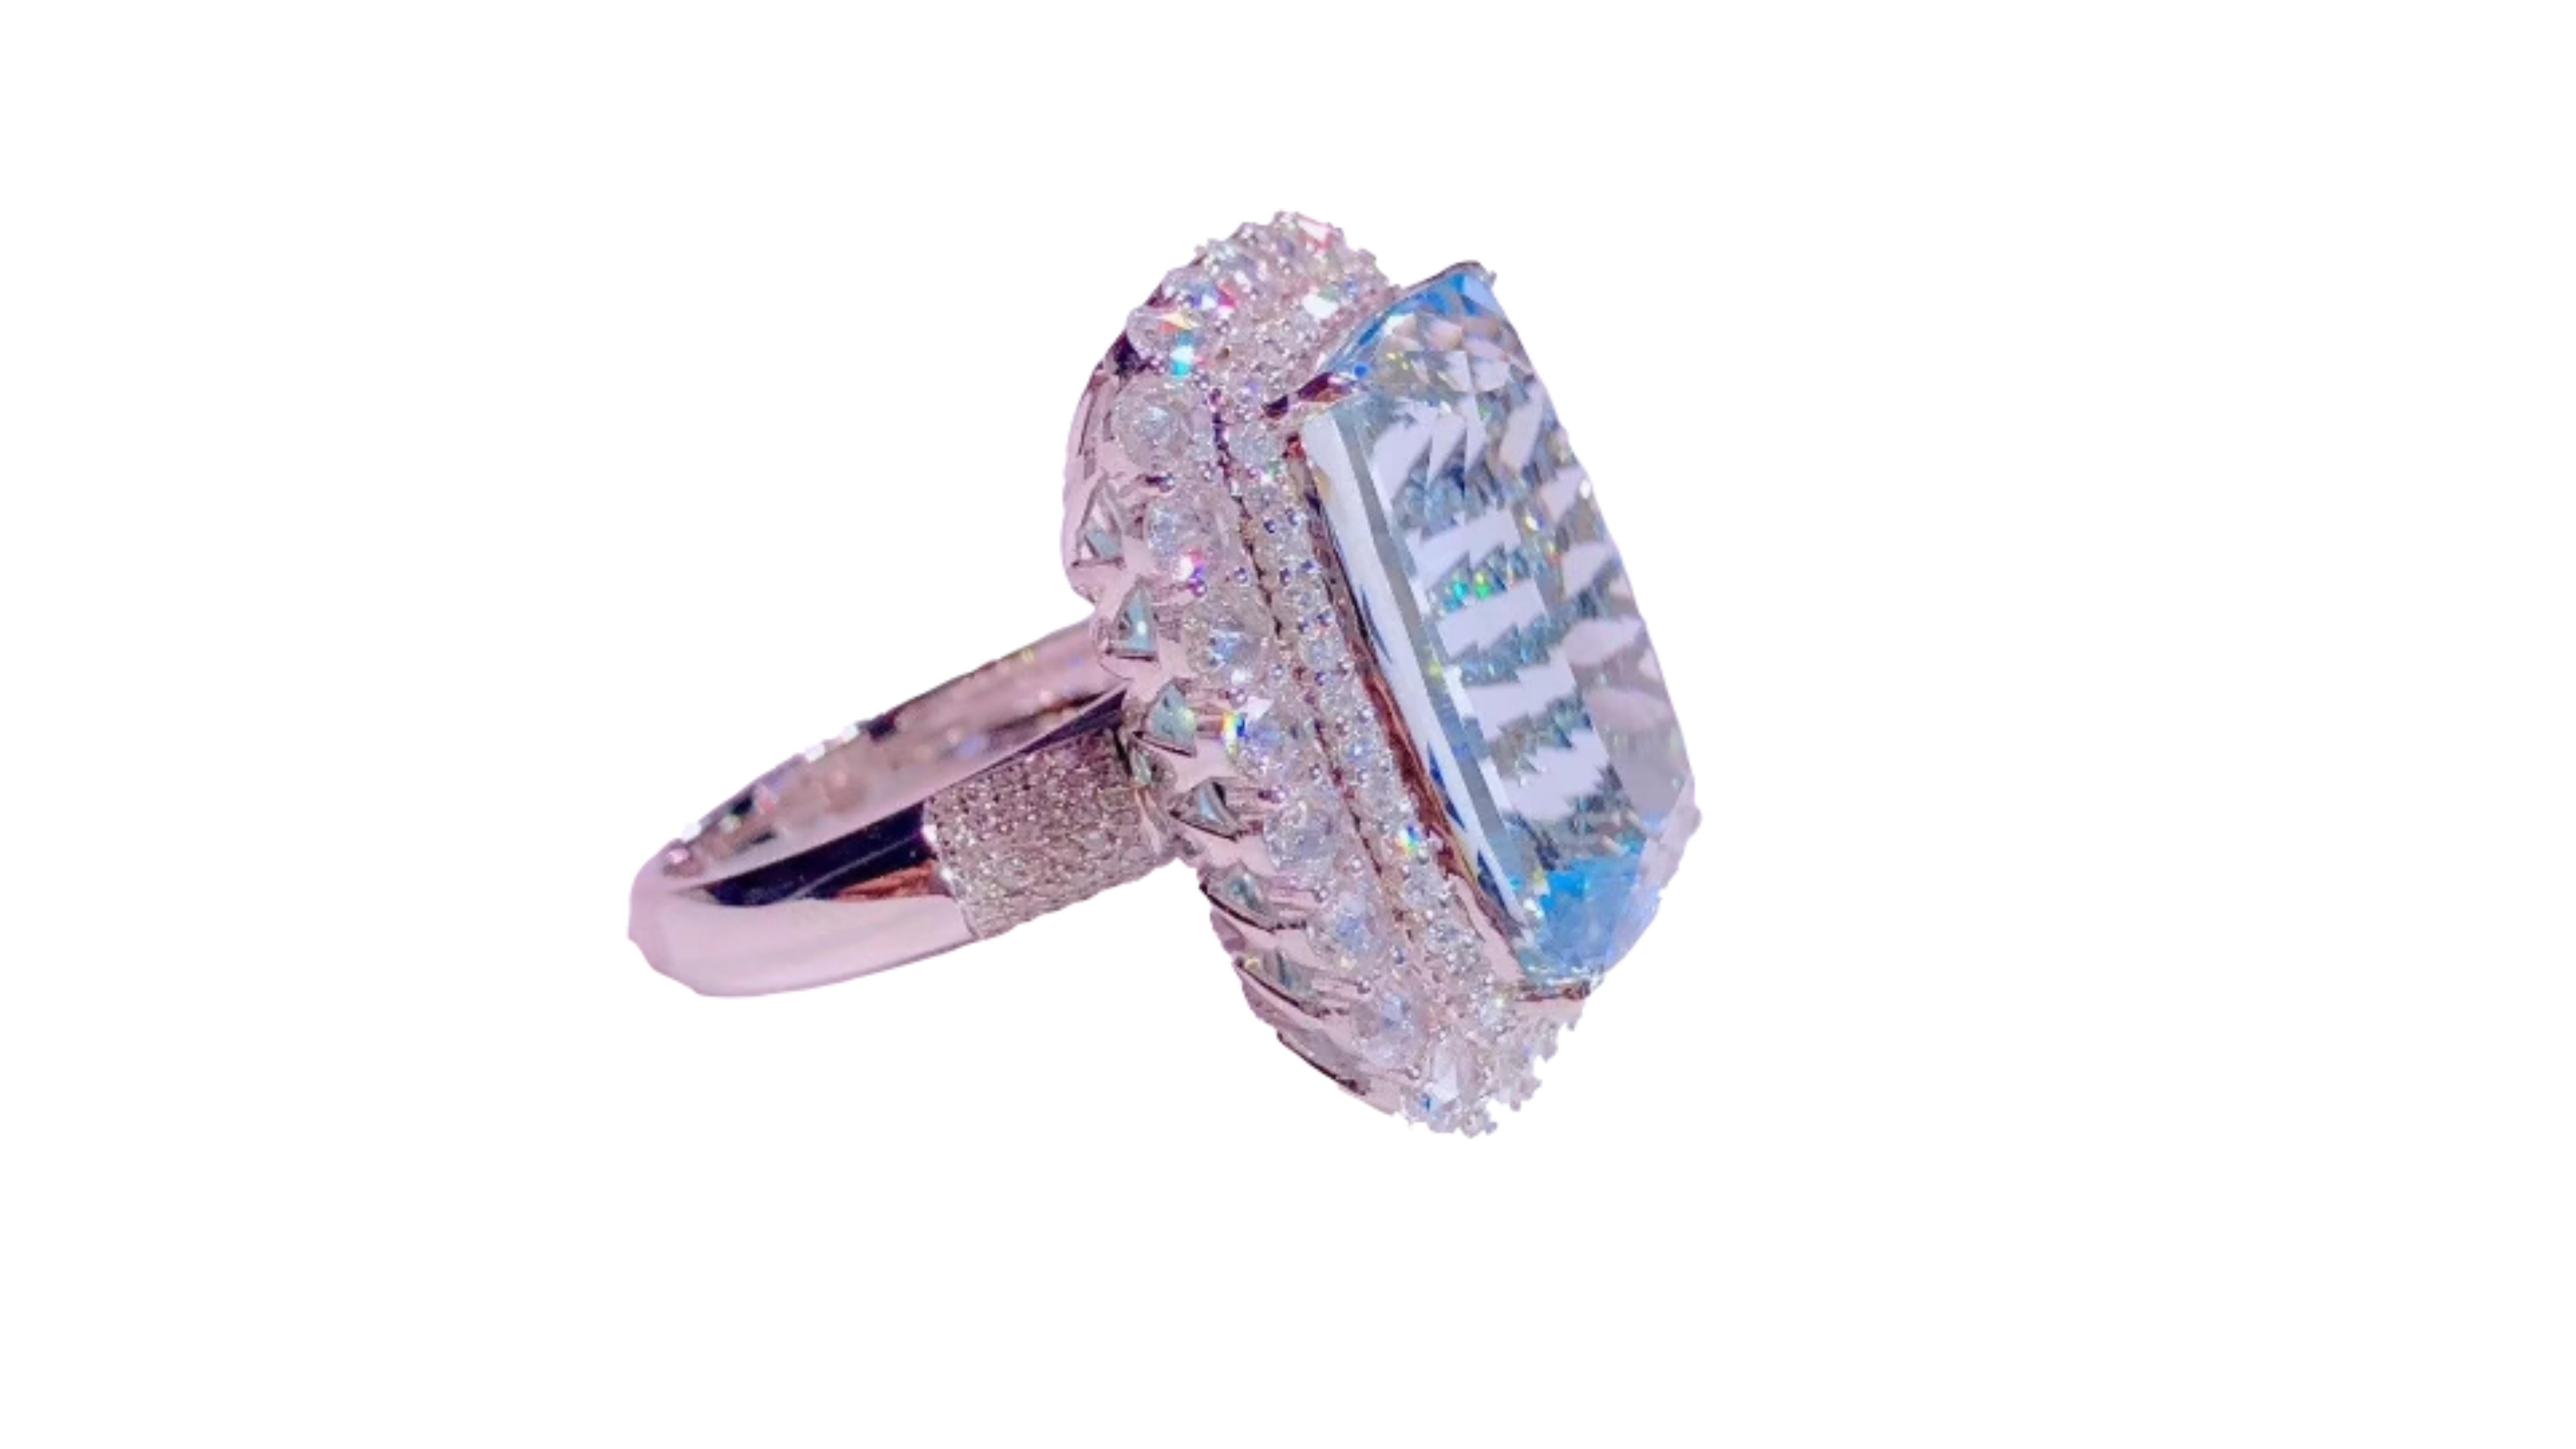 This is a wow factor for a Aquamarine Ring  at 19.5CT with 202 White Diamonds and can also be a pendant too as you can see in photos with the bail that flips out. 



Aquamarine with diamonds at each side and sparkling like a crystal clear ocean, it